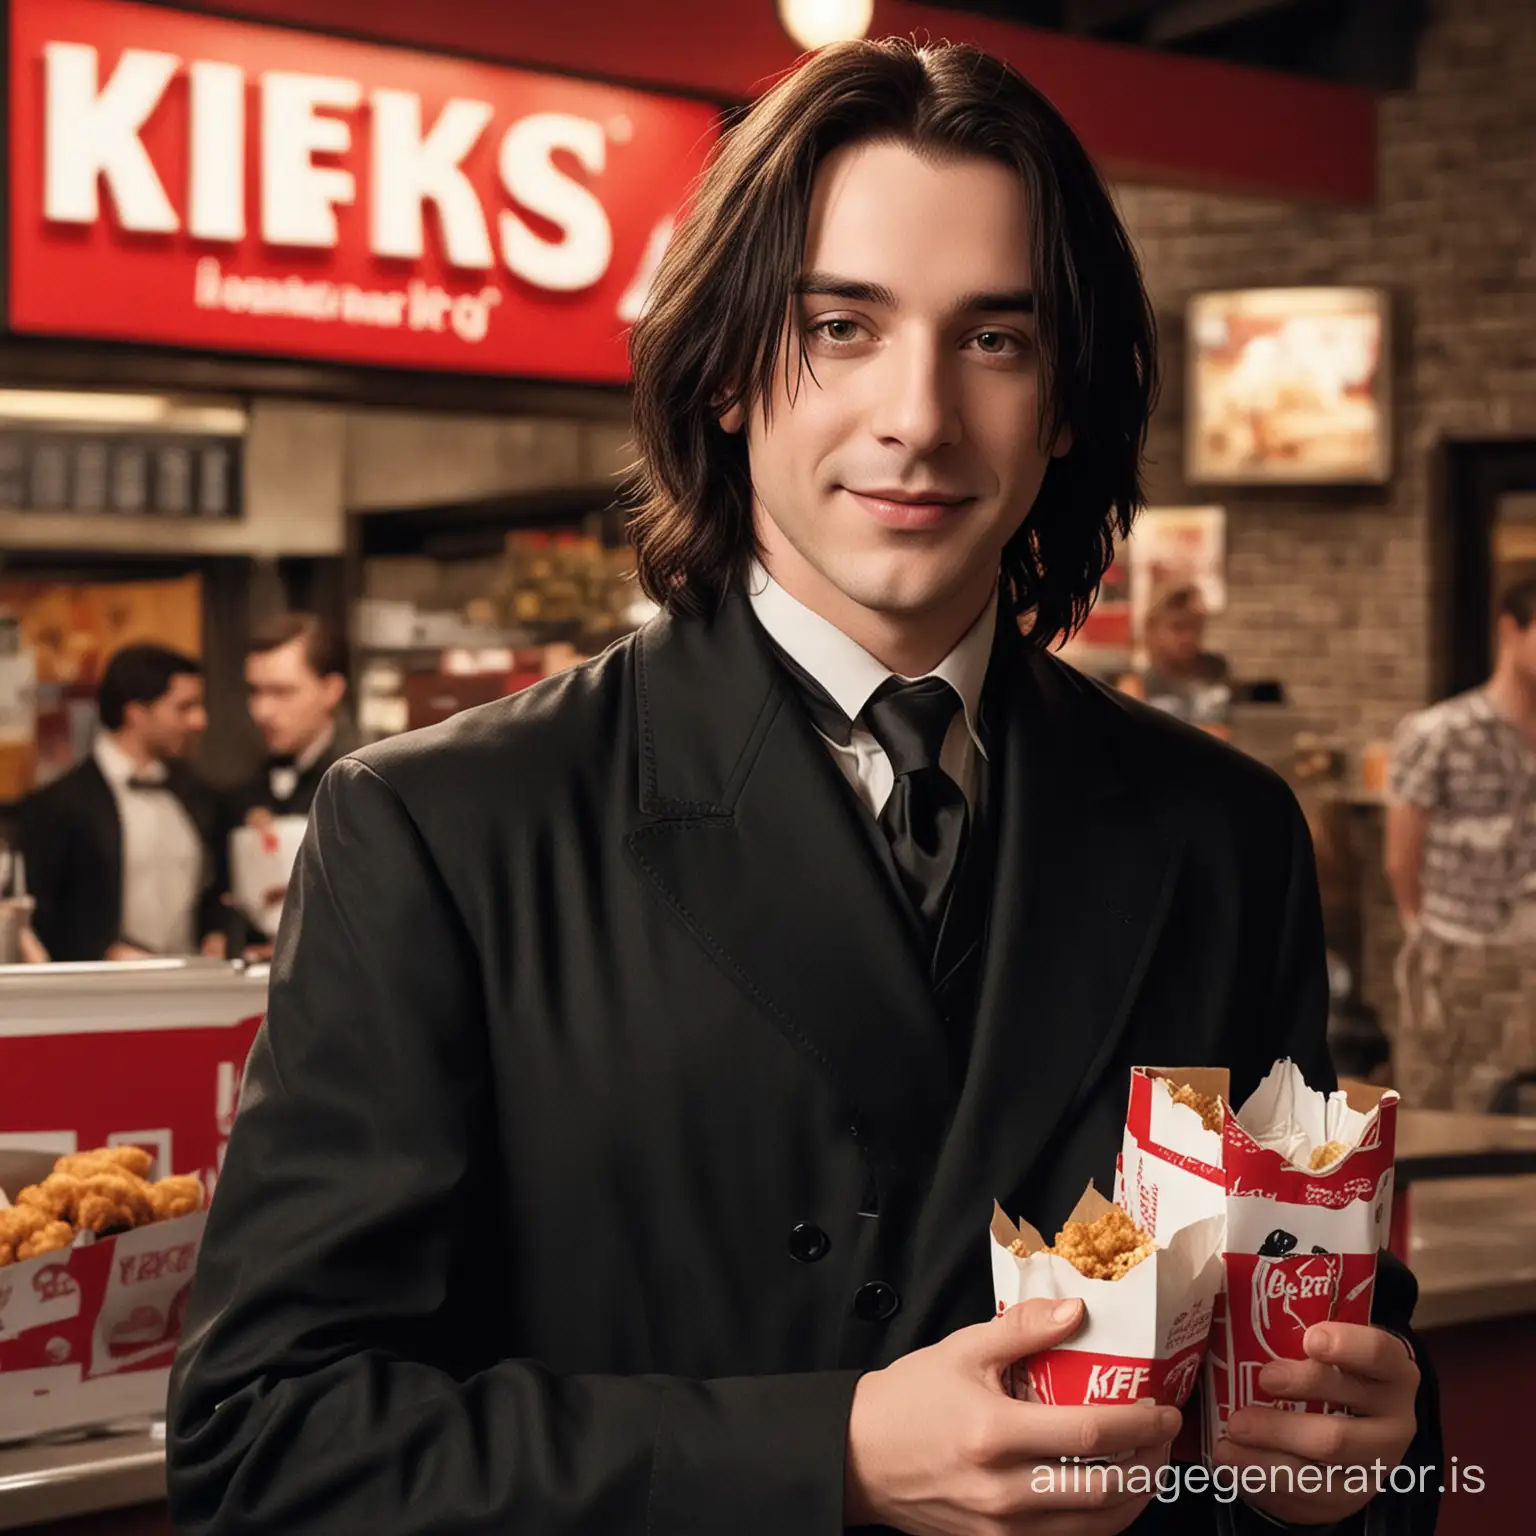 Handsome-Young-Sirius-Snape-Serving-KFC-in-a-Restaurant